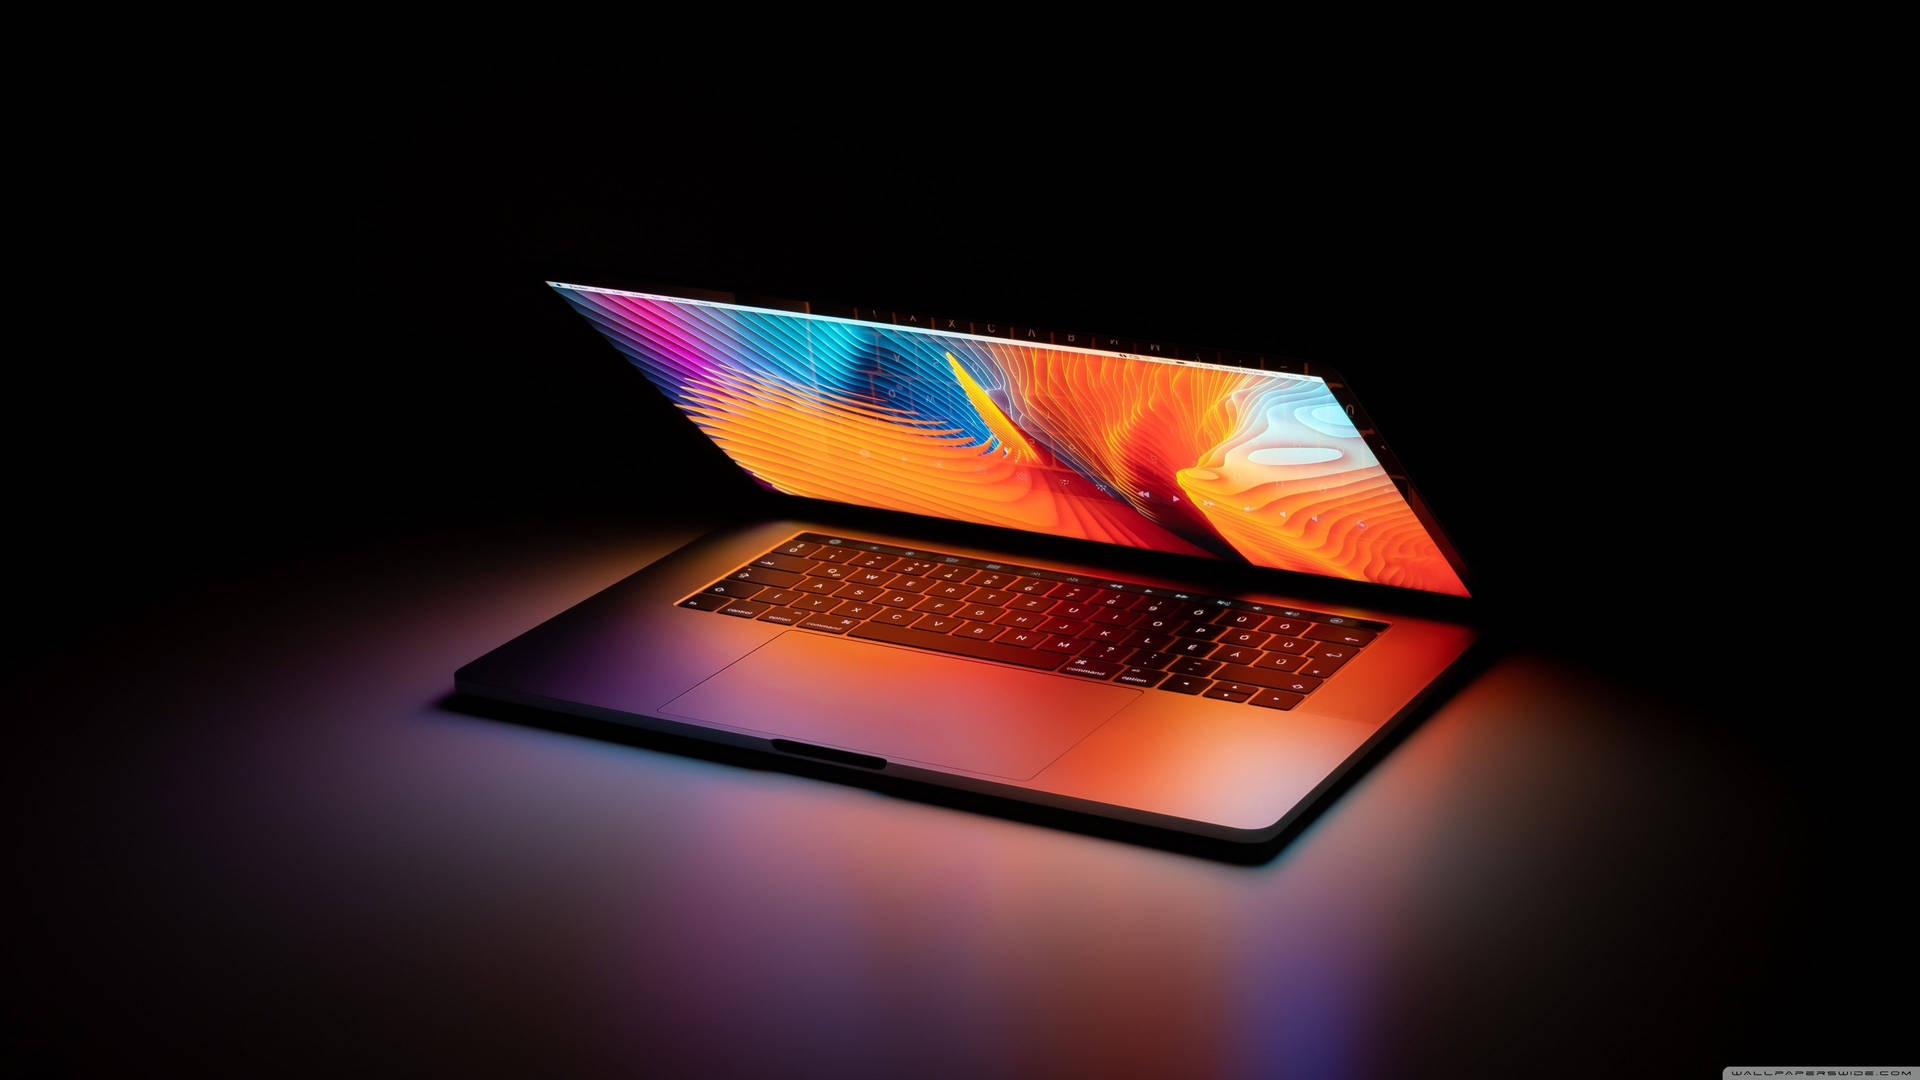 1400+] Laptop Wallpapers for FREE 